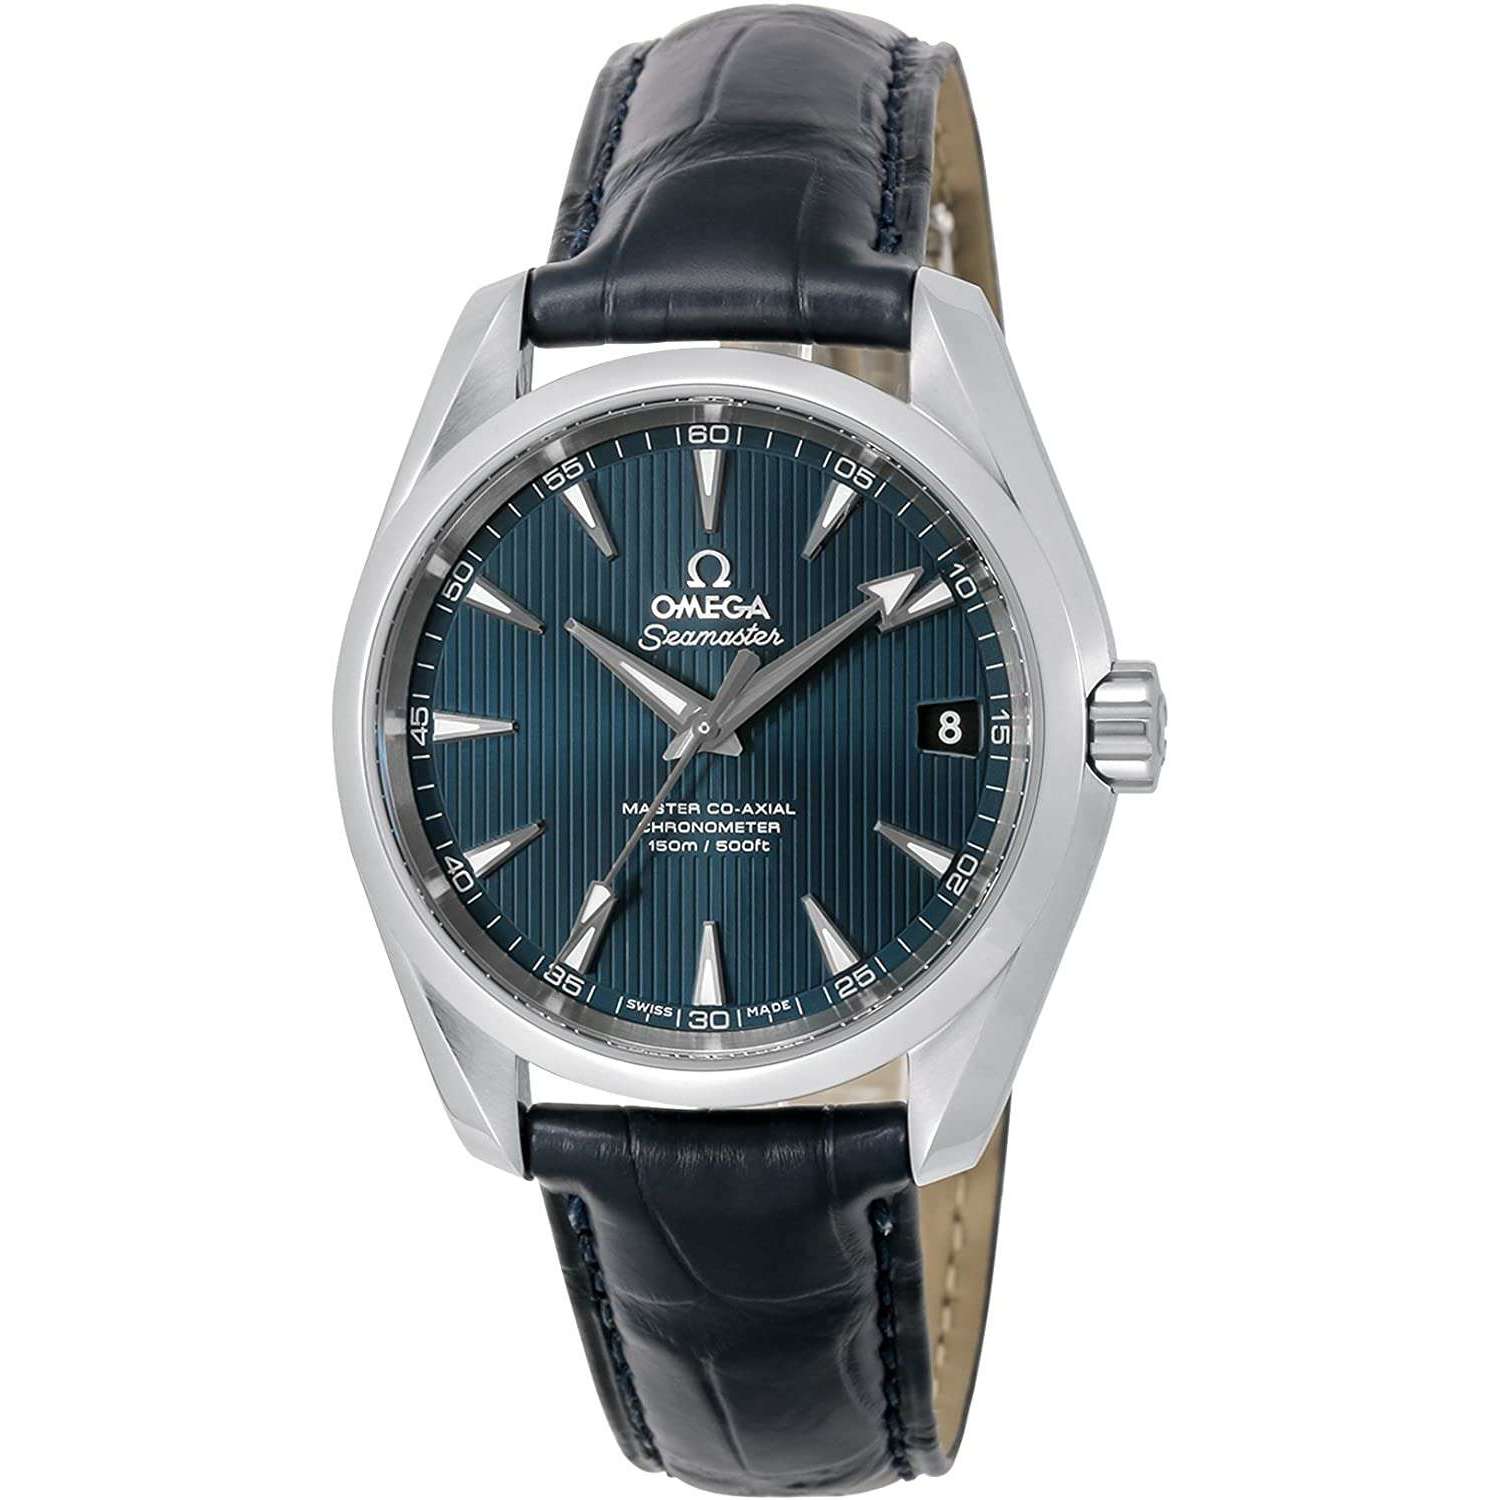 ROOK JAPAN:OMEGA SEAMASTER MASTER CO-AXIAL CHRONOMETER 39 MM MEN WATCH 231.13.39.21.03.001,Luxury Watch,Omega